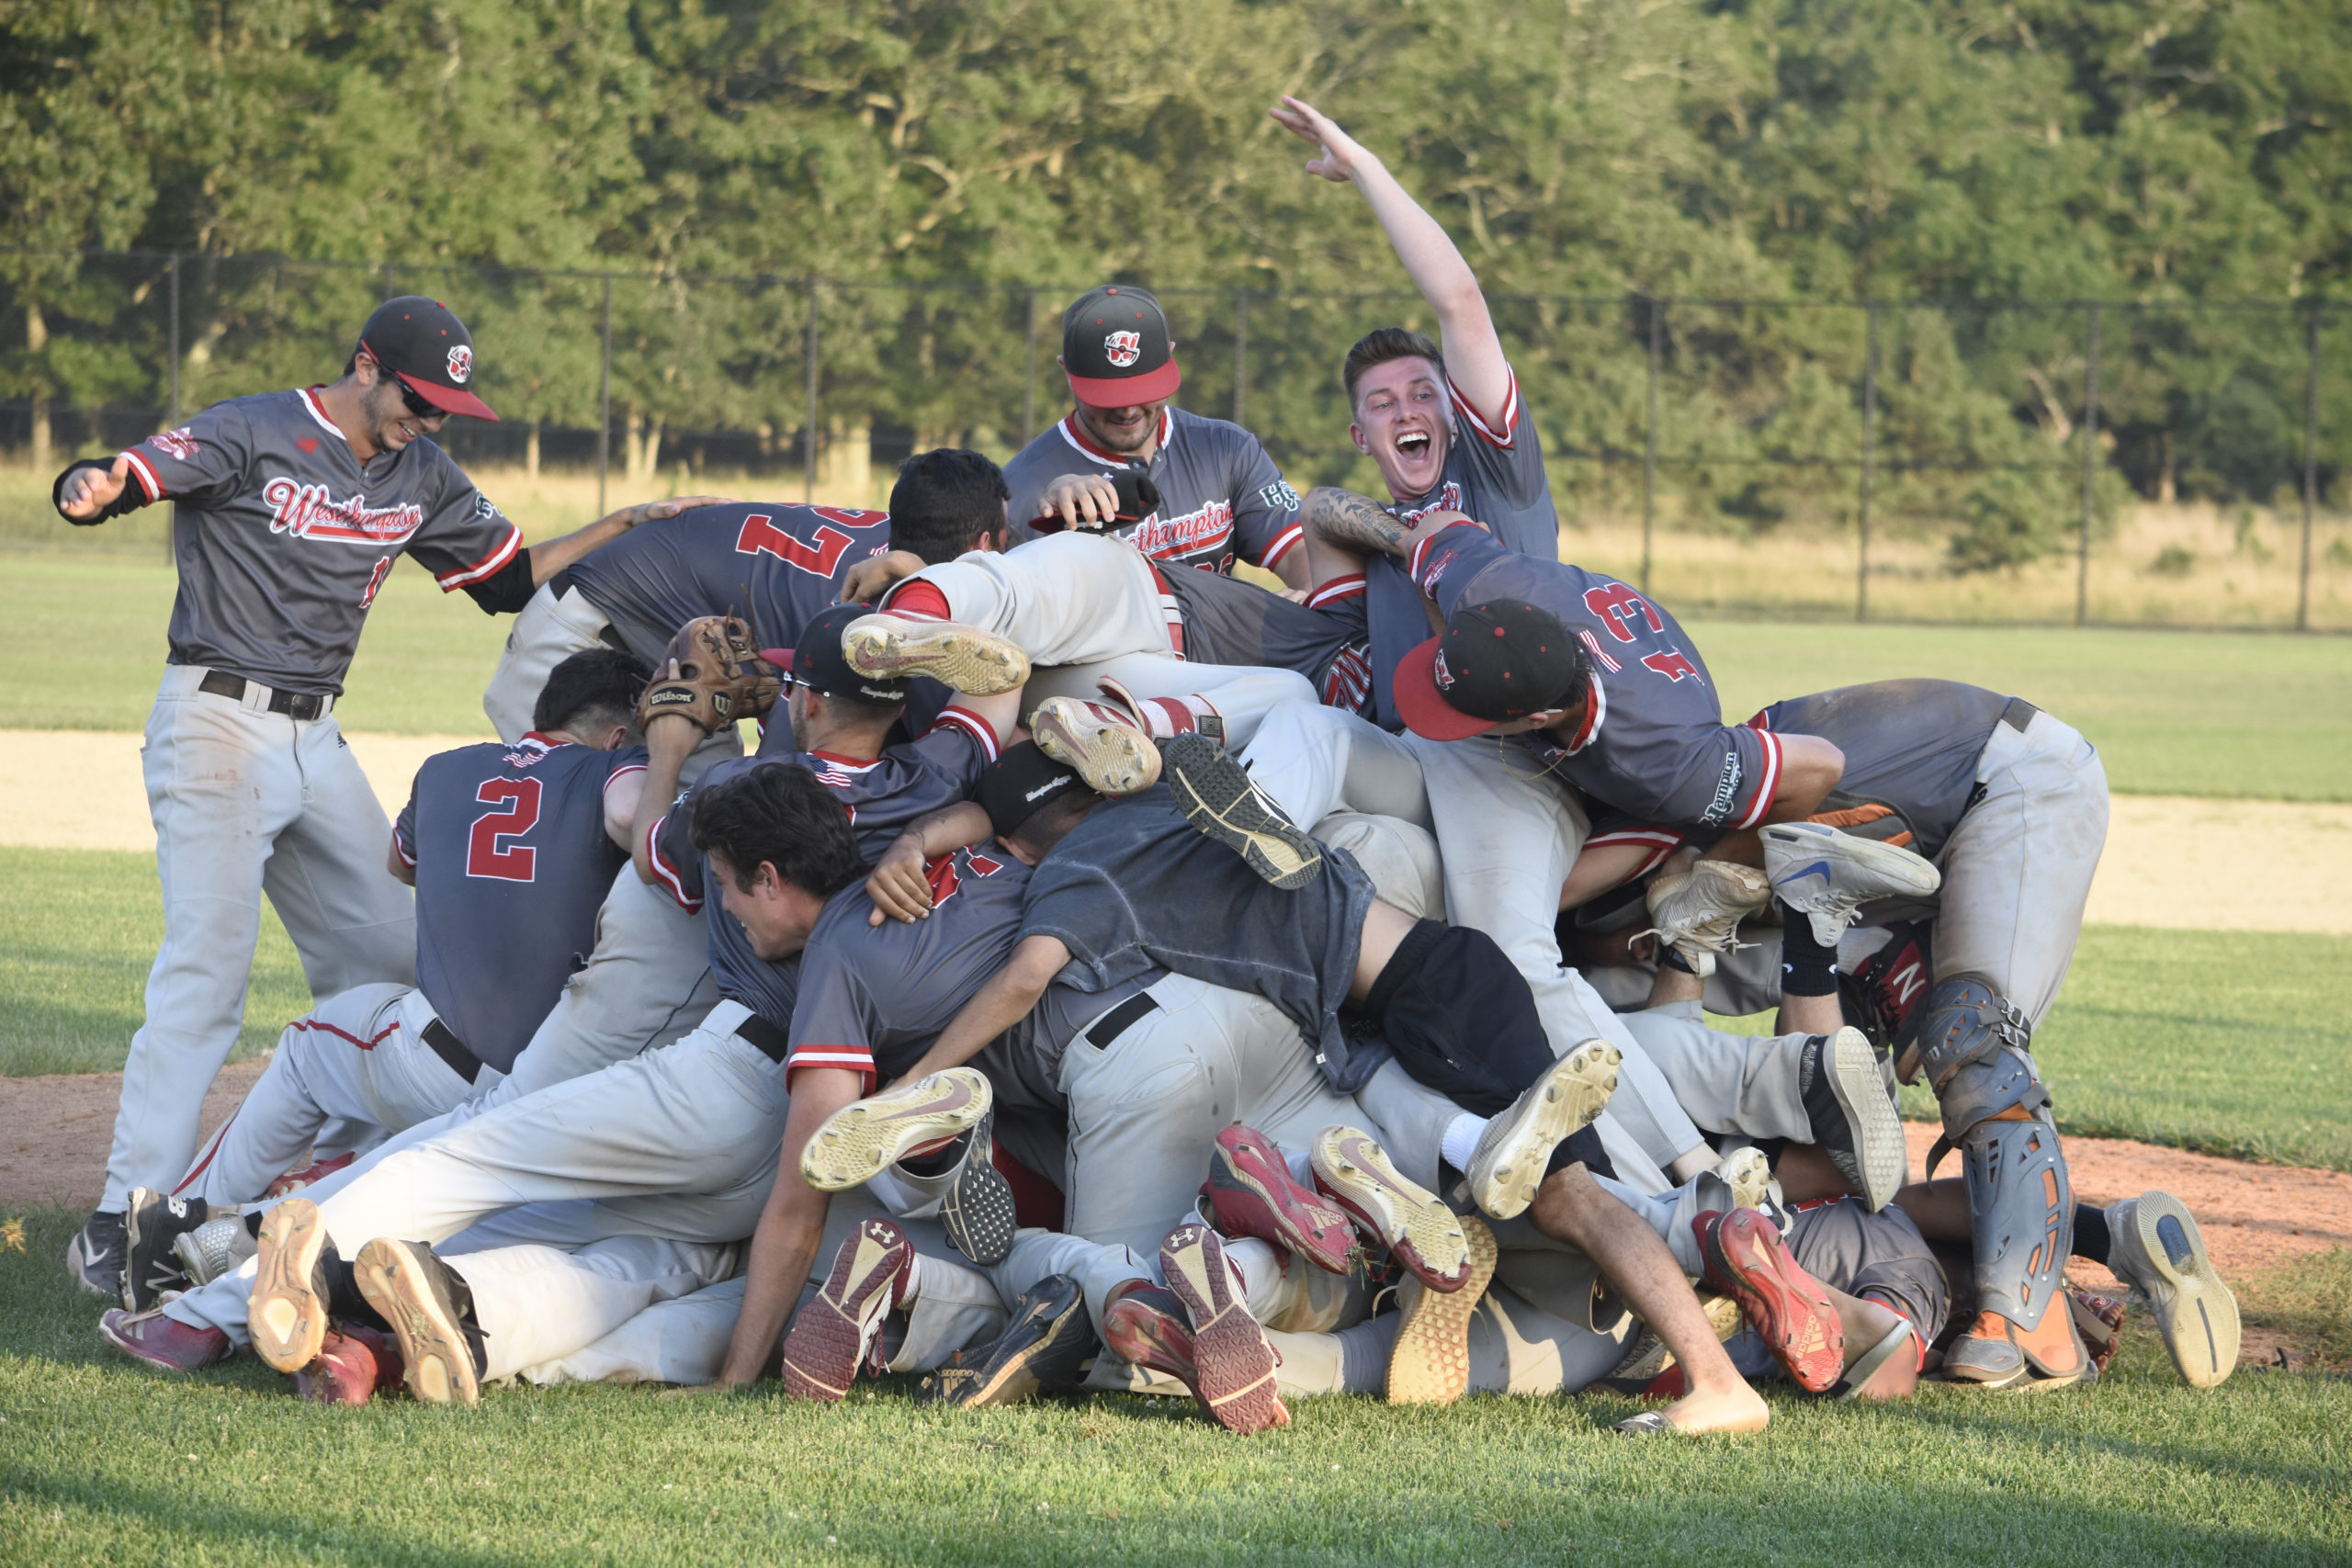 Soaring To The Title 
August 1 -- The Westhampton Aviators celebrate their fourth HCBL Championship after a 7-3 victory over the Riverhead Tomcats.